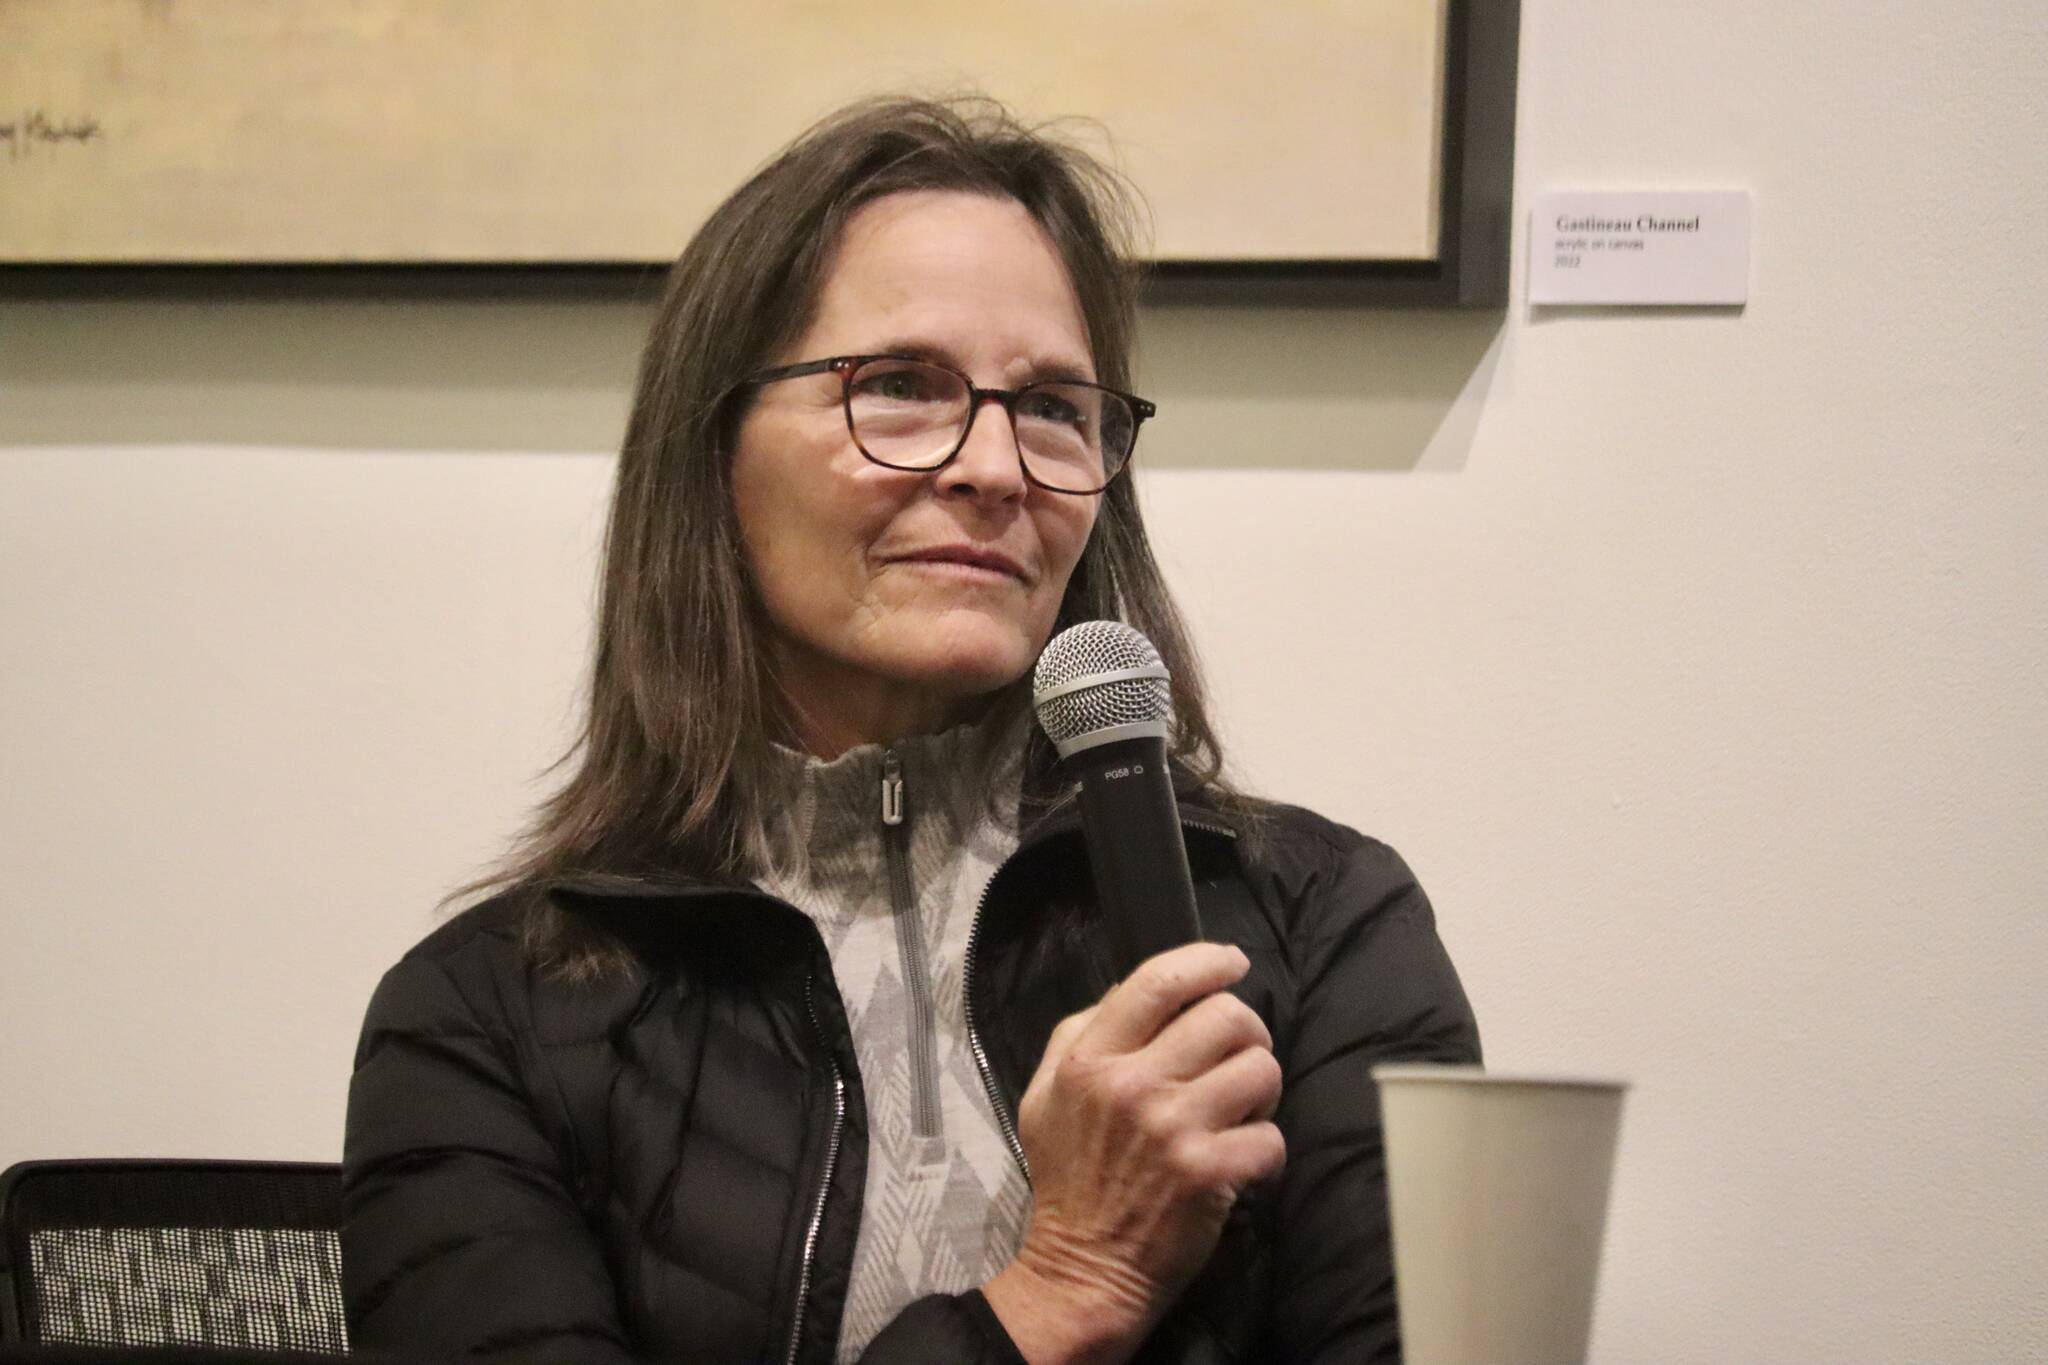 Artist Kerry Kirkpatrick answers questions about her latest exhibition “Capturing the Light” at a recent QA held at the Juneau-Douglas City Museum on Saturday. (Jonson Kuhn / Juneau Empire)